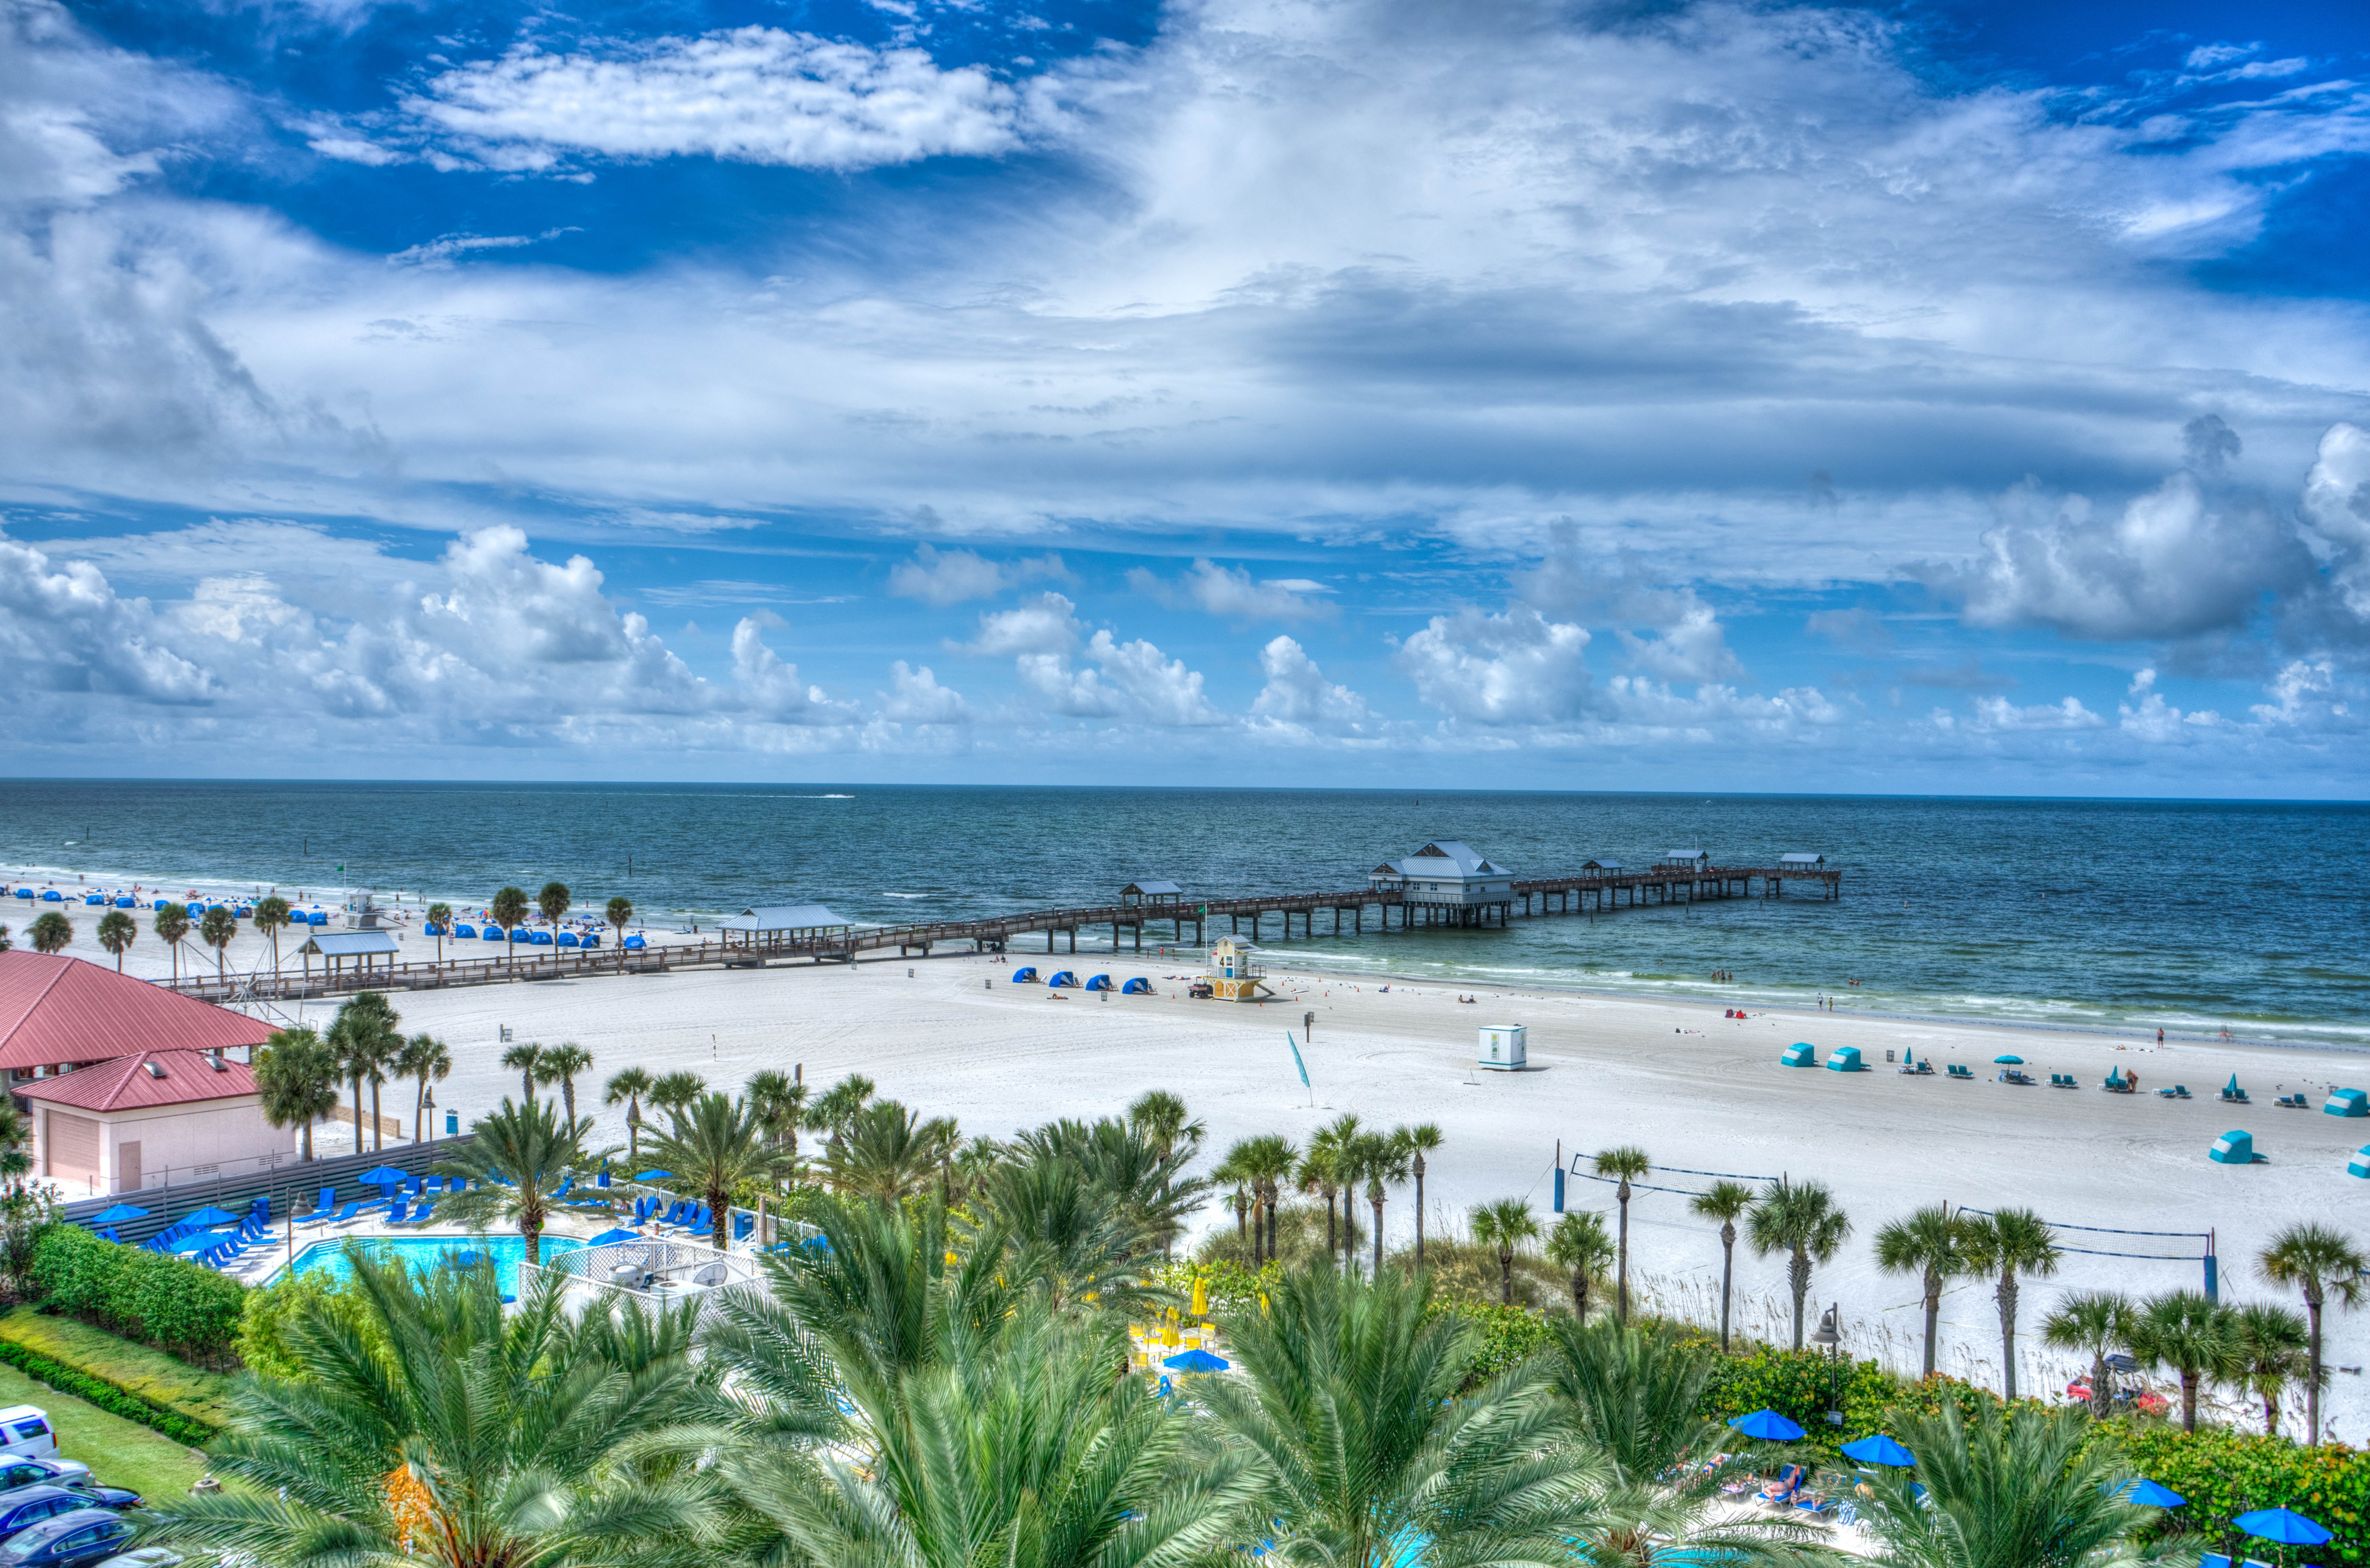 Visiting Clearwater Beach in the Fall?